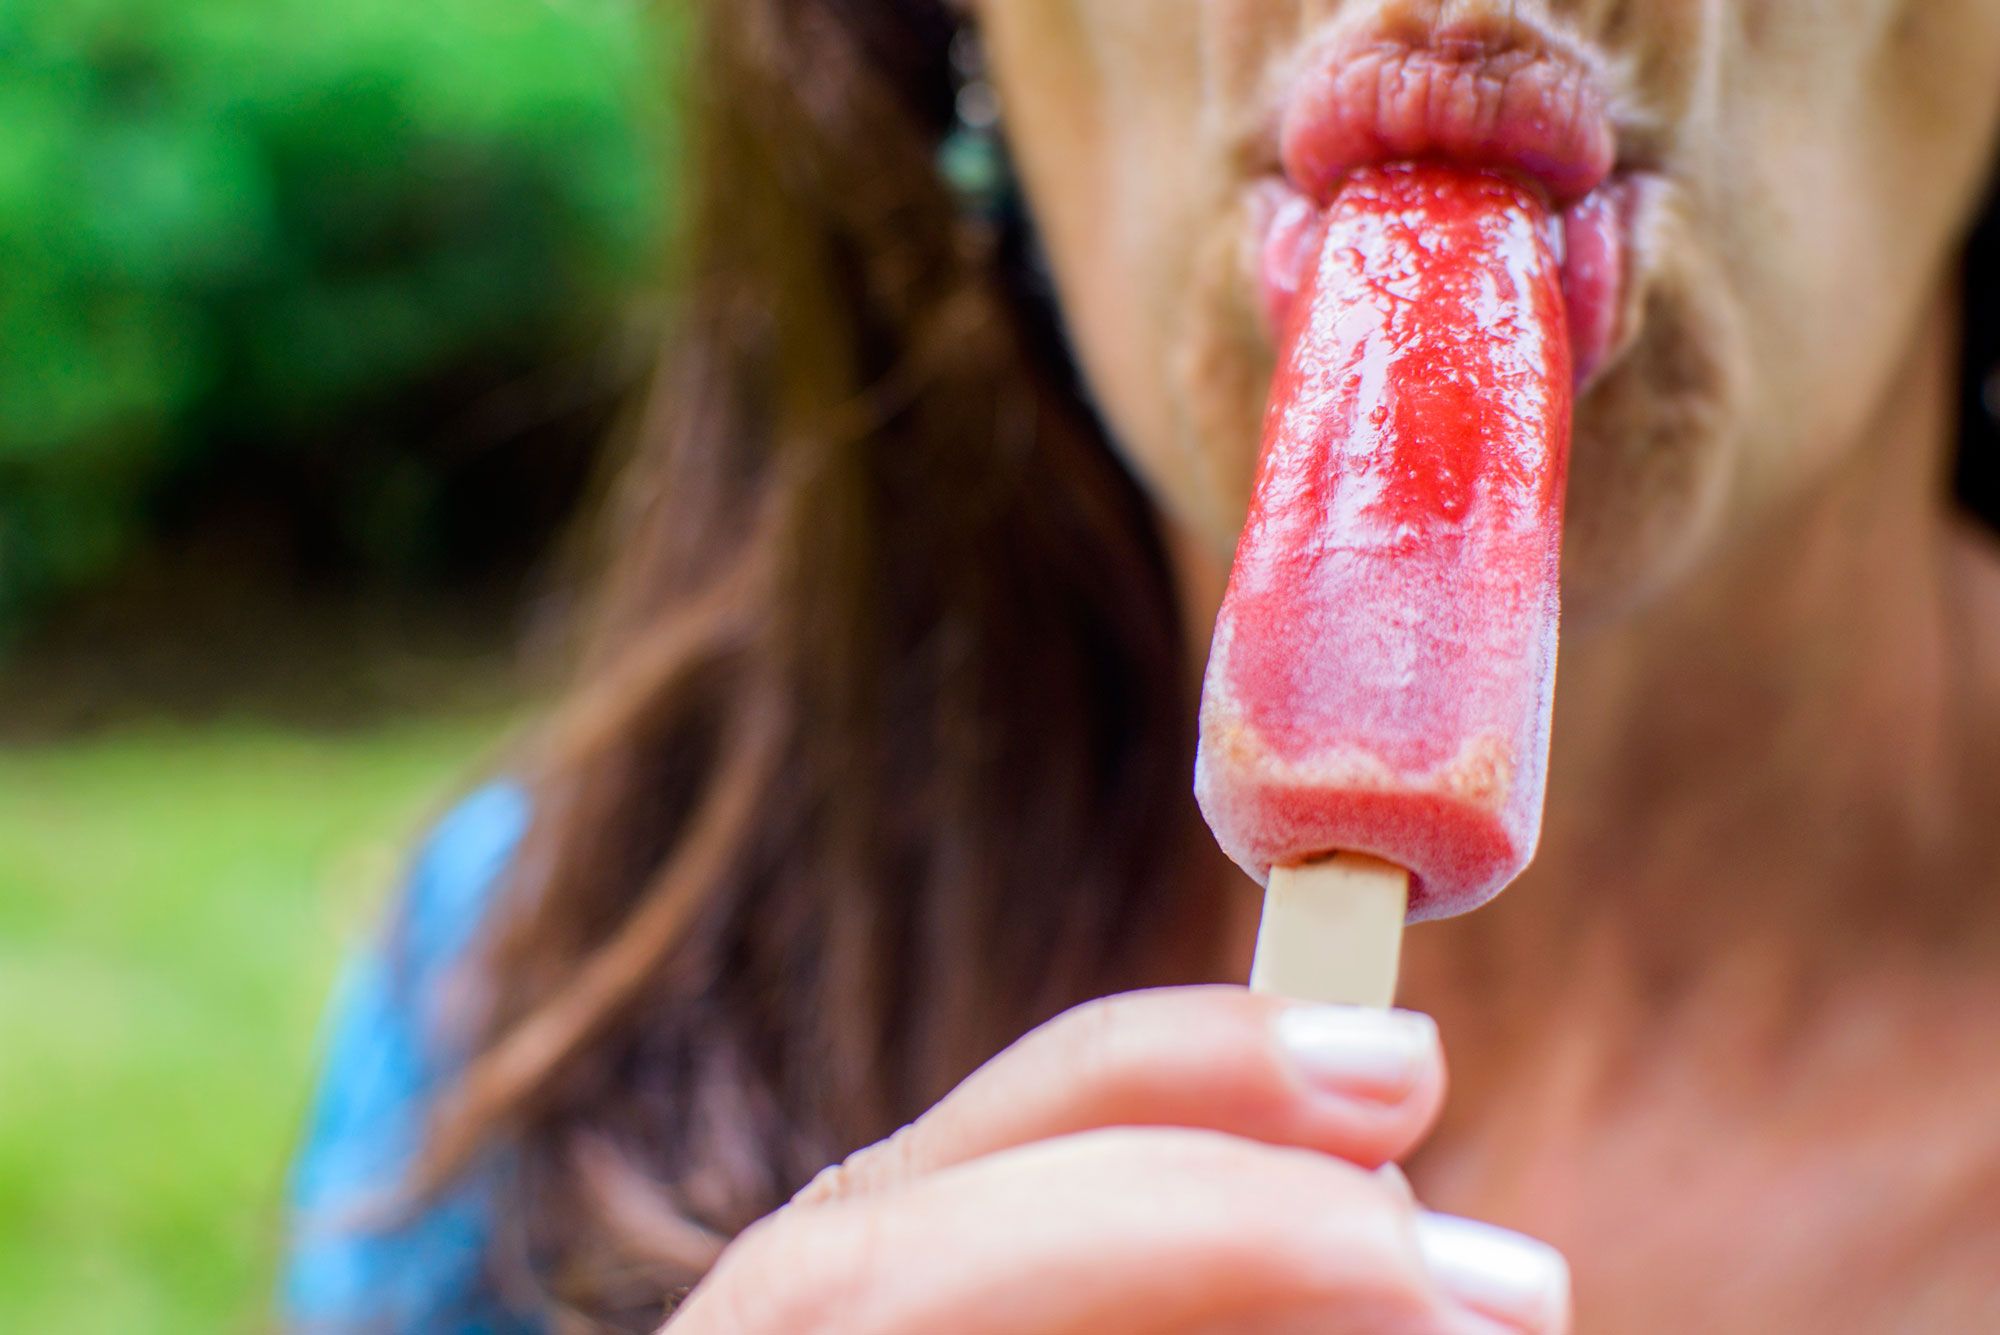 Disgusting Porn Tongue - What Blow Jobs Really Feel Like, According to 12 Guys